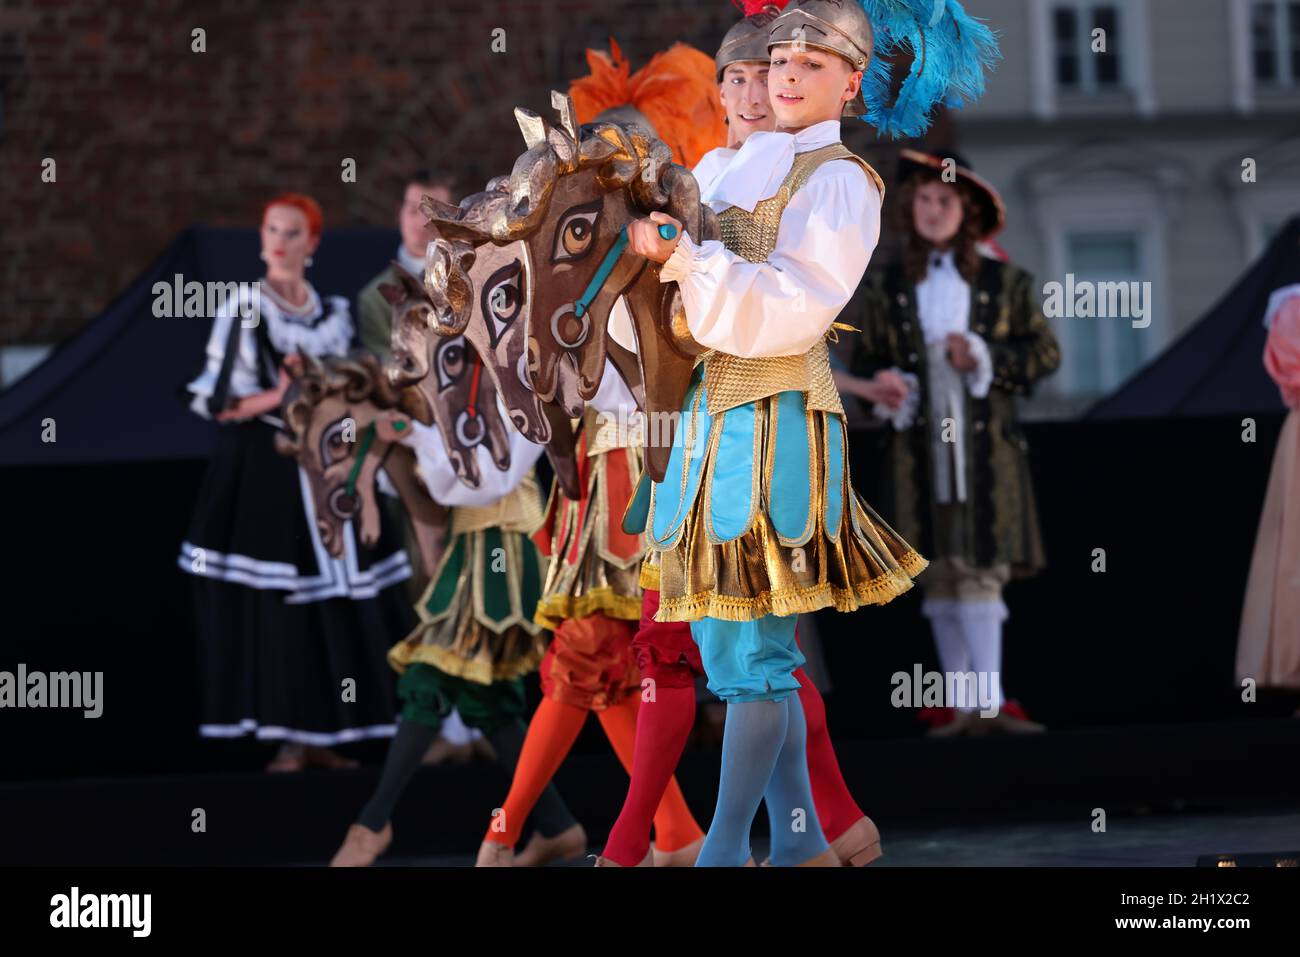 Krakow, Poland - July 25, 2021: Artists in costumes performing on stage during a show of court dances at the Main Market Square as part of the 22nd Cr Stock Photo